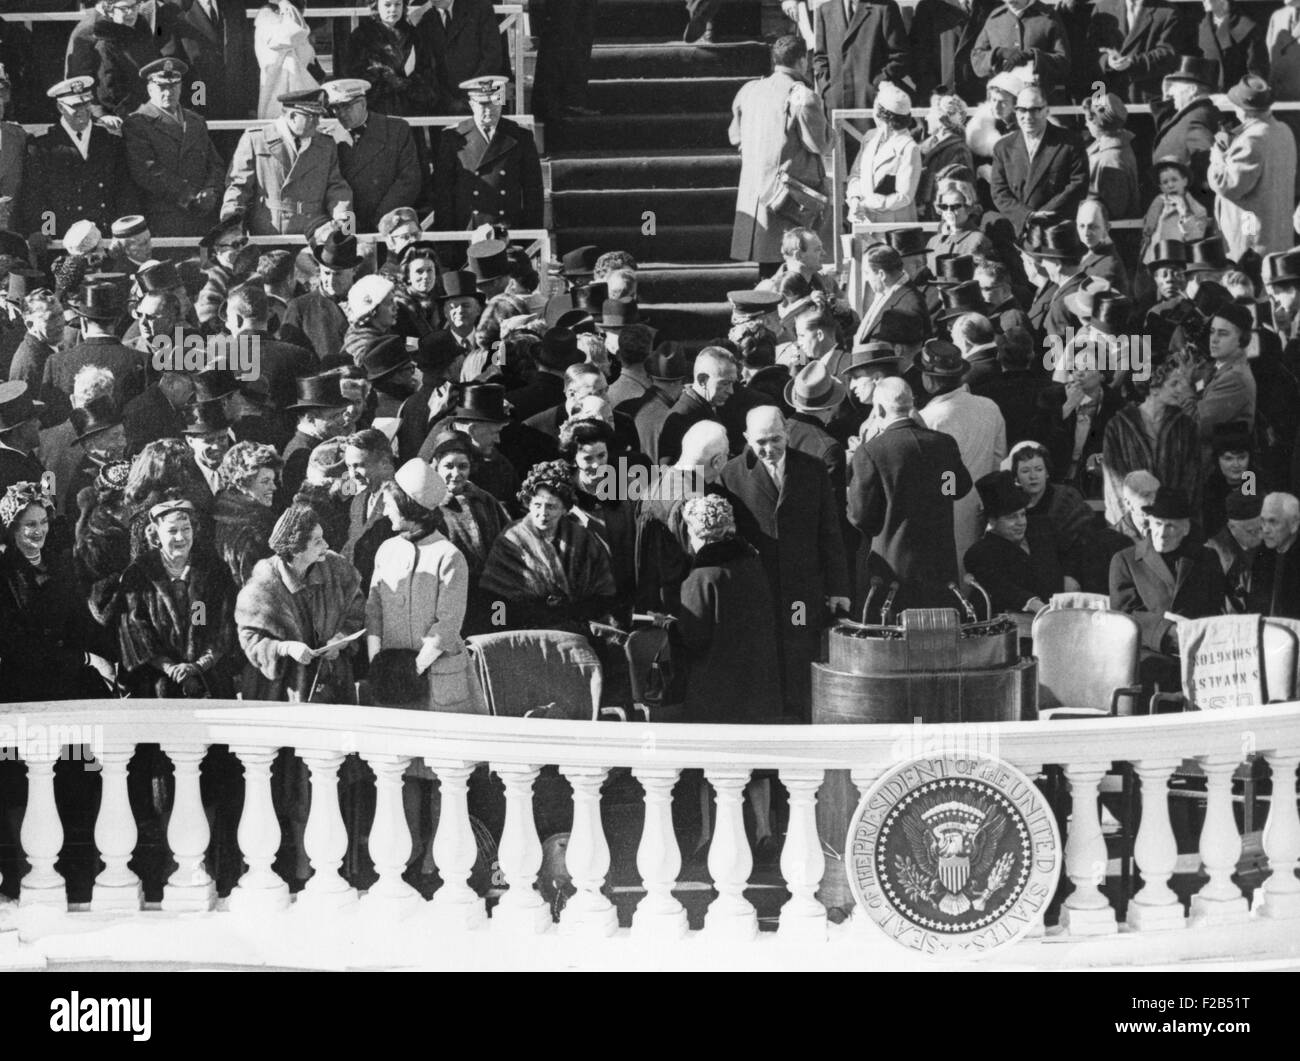 Guests talk and mingle before the Inauguration ceremony of President John Kennedy. Jacqueline Kennedy talks with Lady Bird Johnson as they await arrival of President-elect John F. Kennedy and Vice President-elect Lyndon B. Johnson. Behind them: John F. Kennedy's sister Eunice Kennedy Shriver; her husband R. Sargent Shriver; and Attorney General-designate Robert F. Kennedy. Jan. 20, 1961. - (BSLOC 2015 1 143) Stock Photo